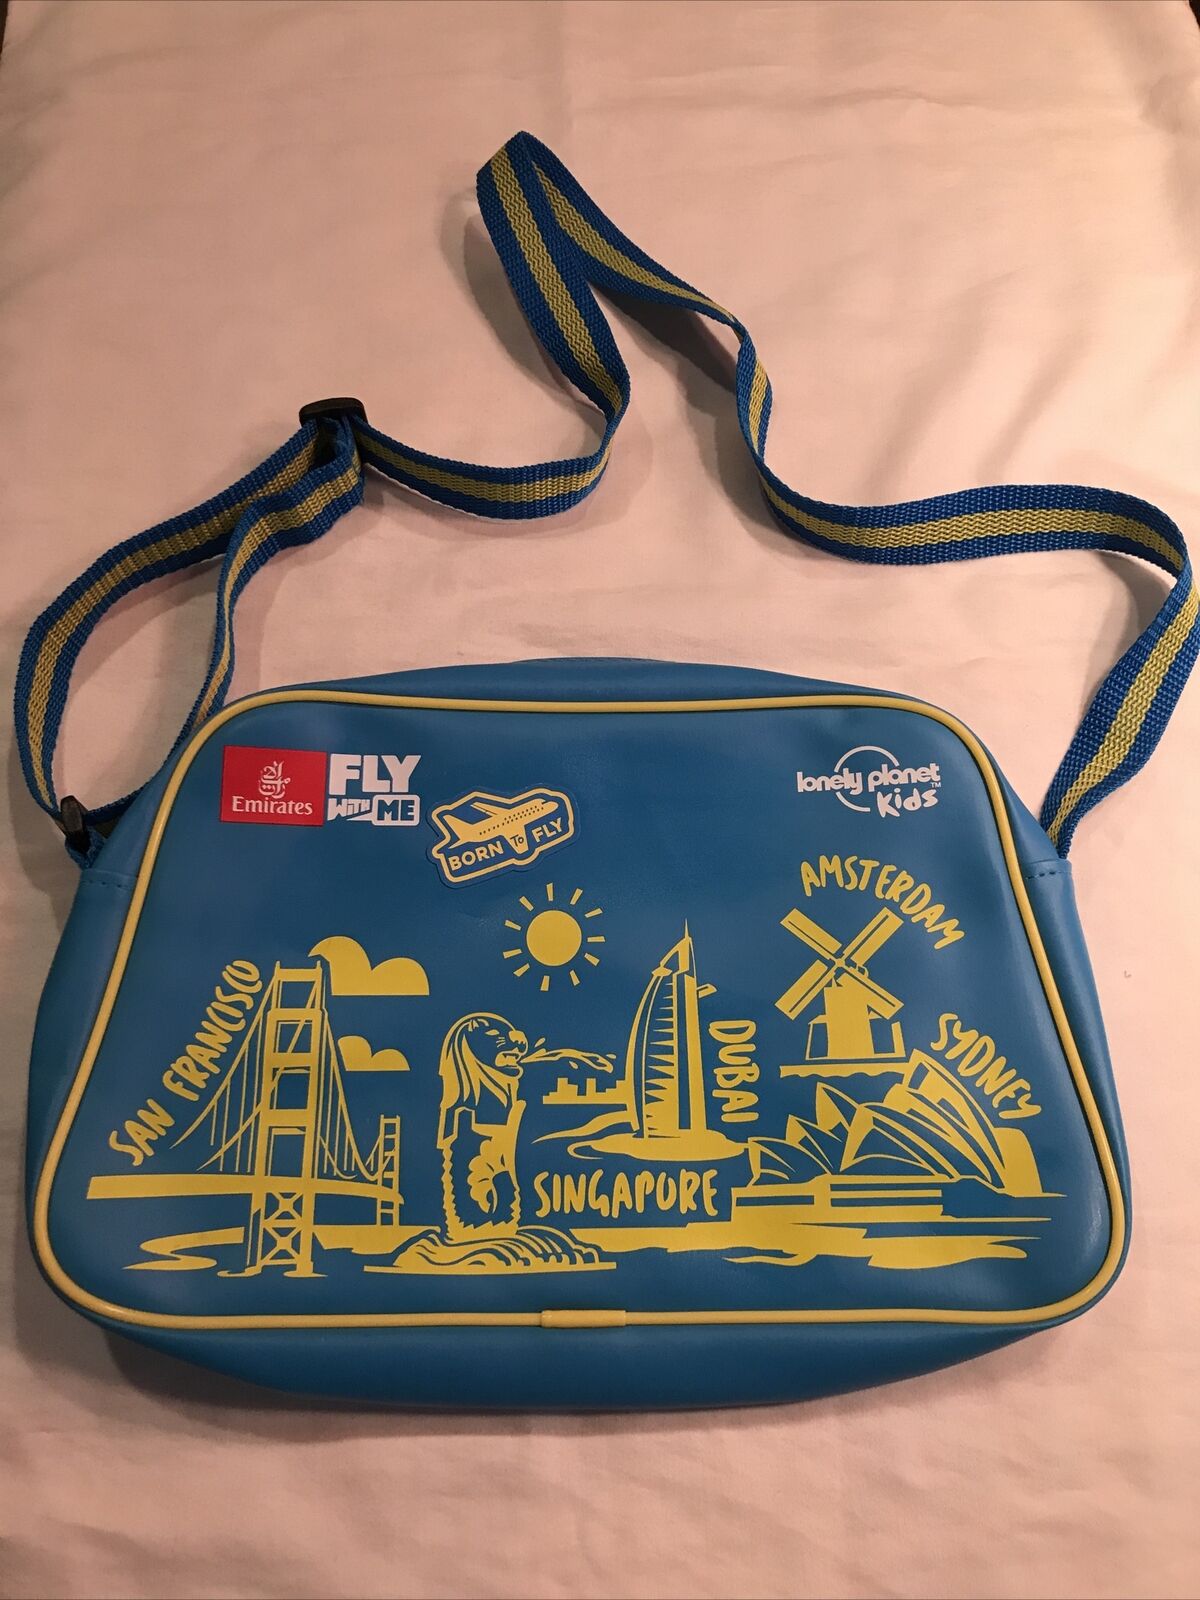 Emirates Airlines Fly With Me Lonely Planet Kids Travel Bag/Adjustable Strap #